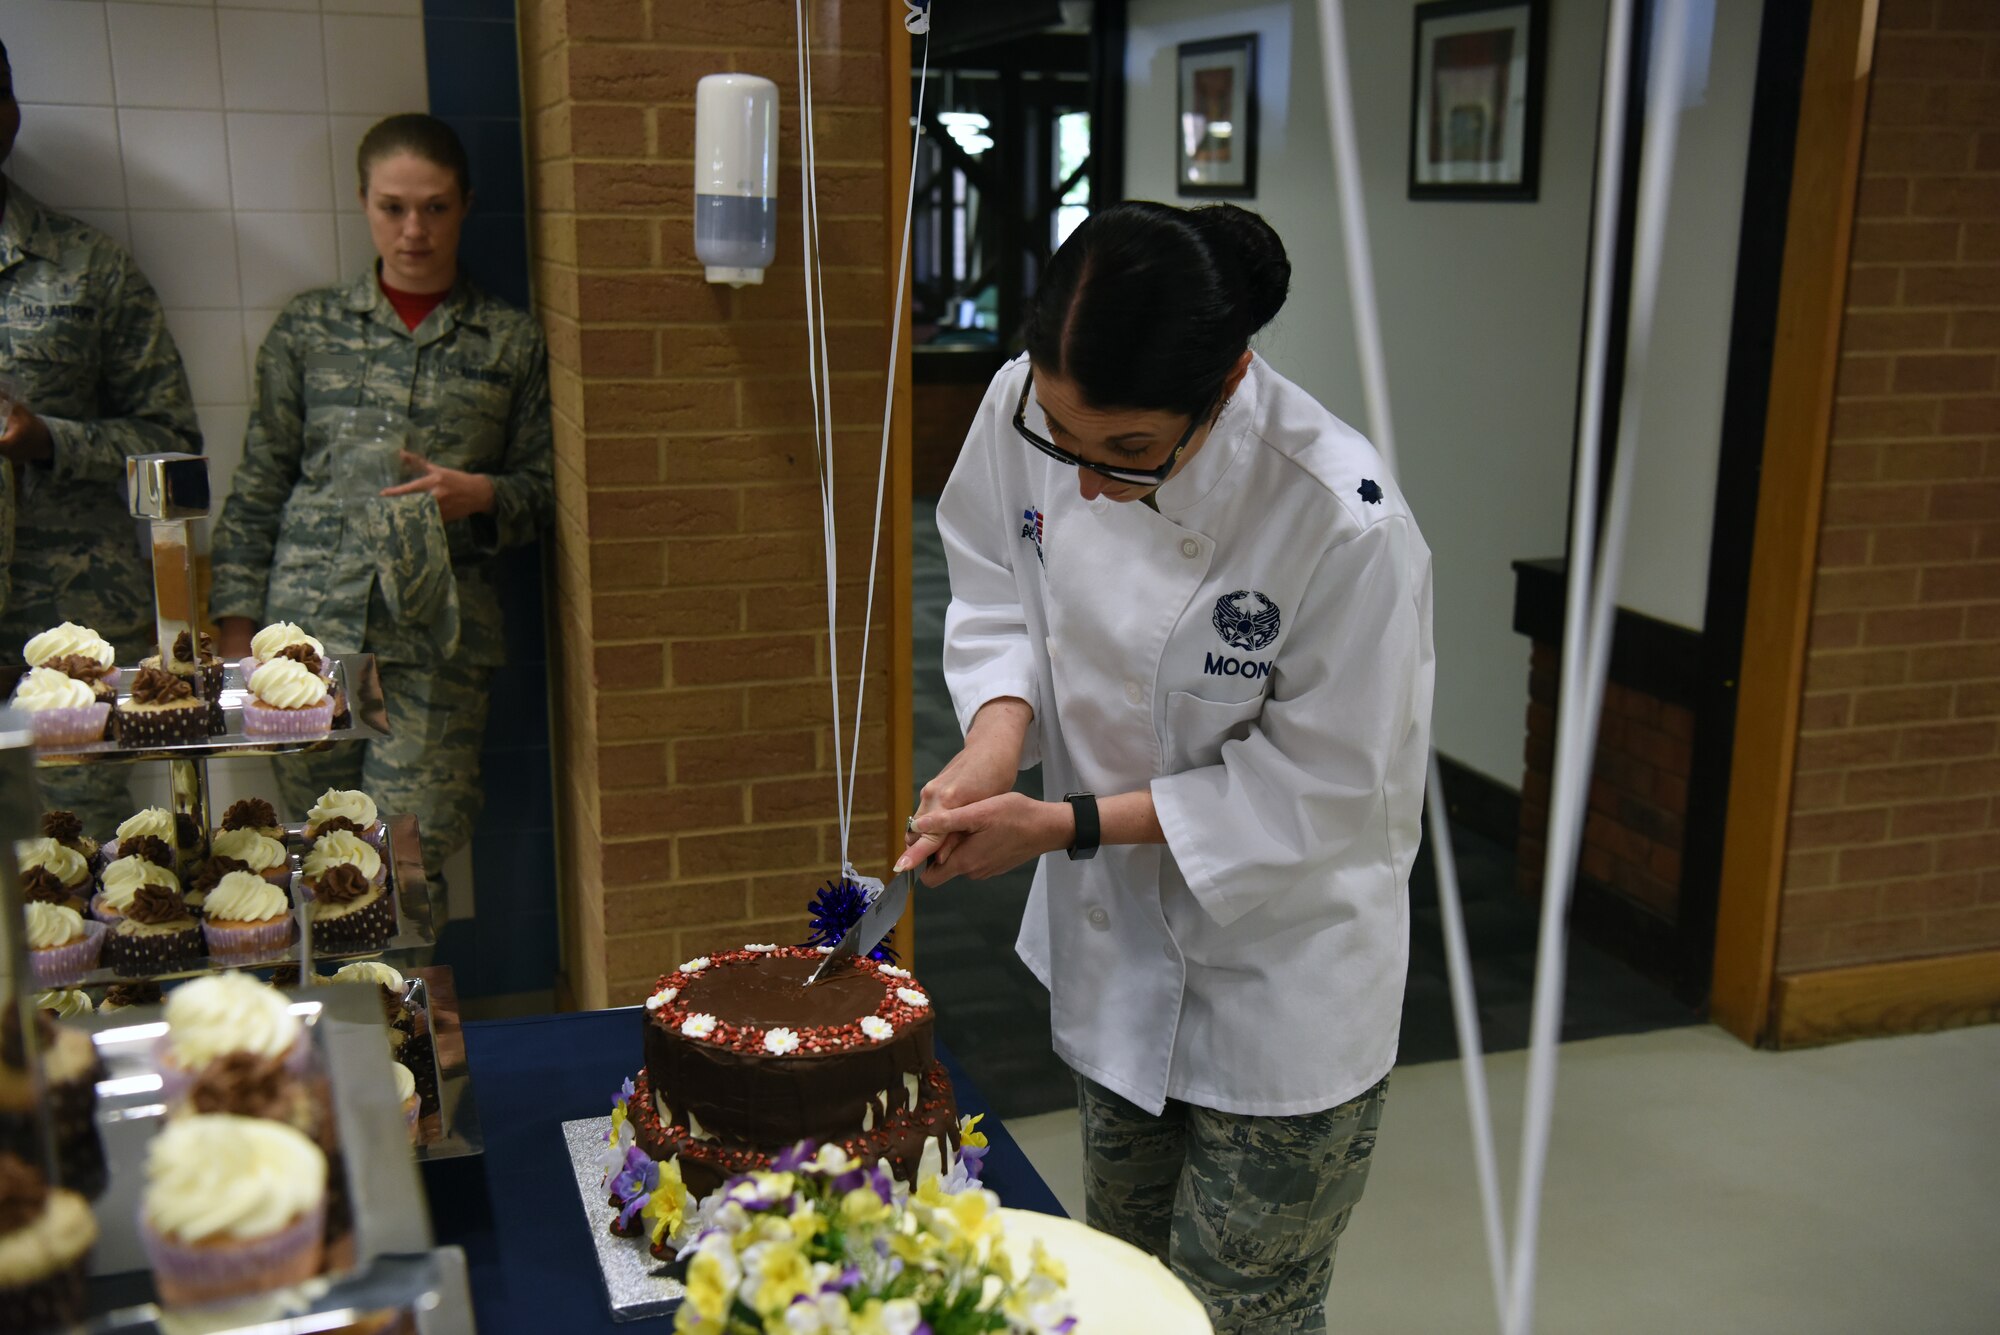 Lt. Col. Kelli R. Moon, commander of the 48th Force Support Squadron, cuts a cake at the Knight's Table Dining Facility as part of the 48th Force Support Squadron's "You Got Served" events at Royal Air Force Lakenheath, England, May 18, 2018. The Knight's Table Dining Facility held a Royal Wedding cake cutting event for dining facility patrons. (U.S. Air Force Photo/ Airman 1st Class John A. Crawford)